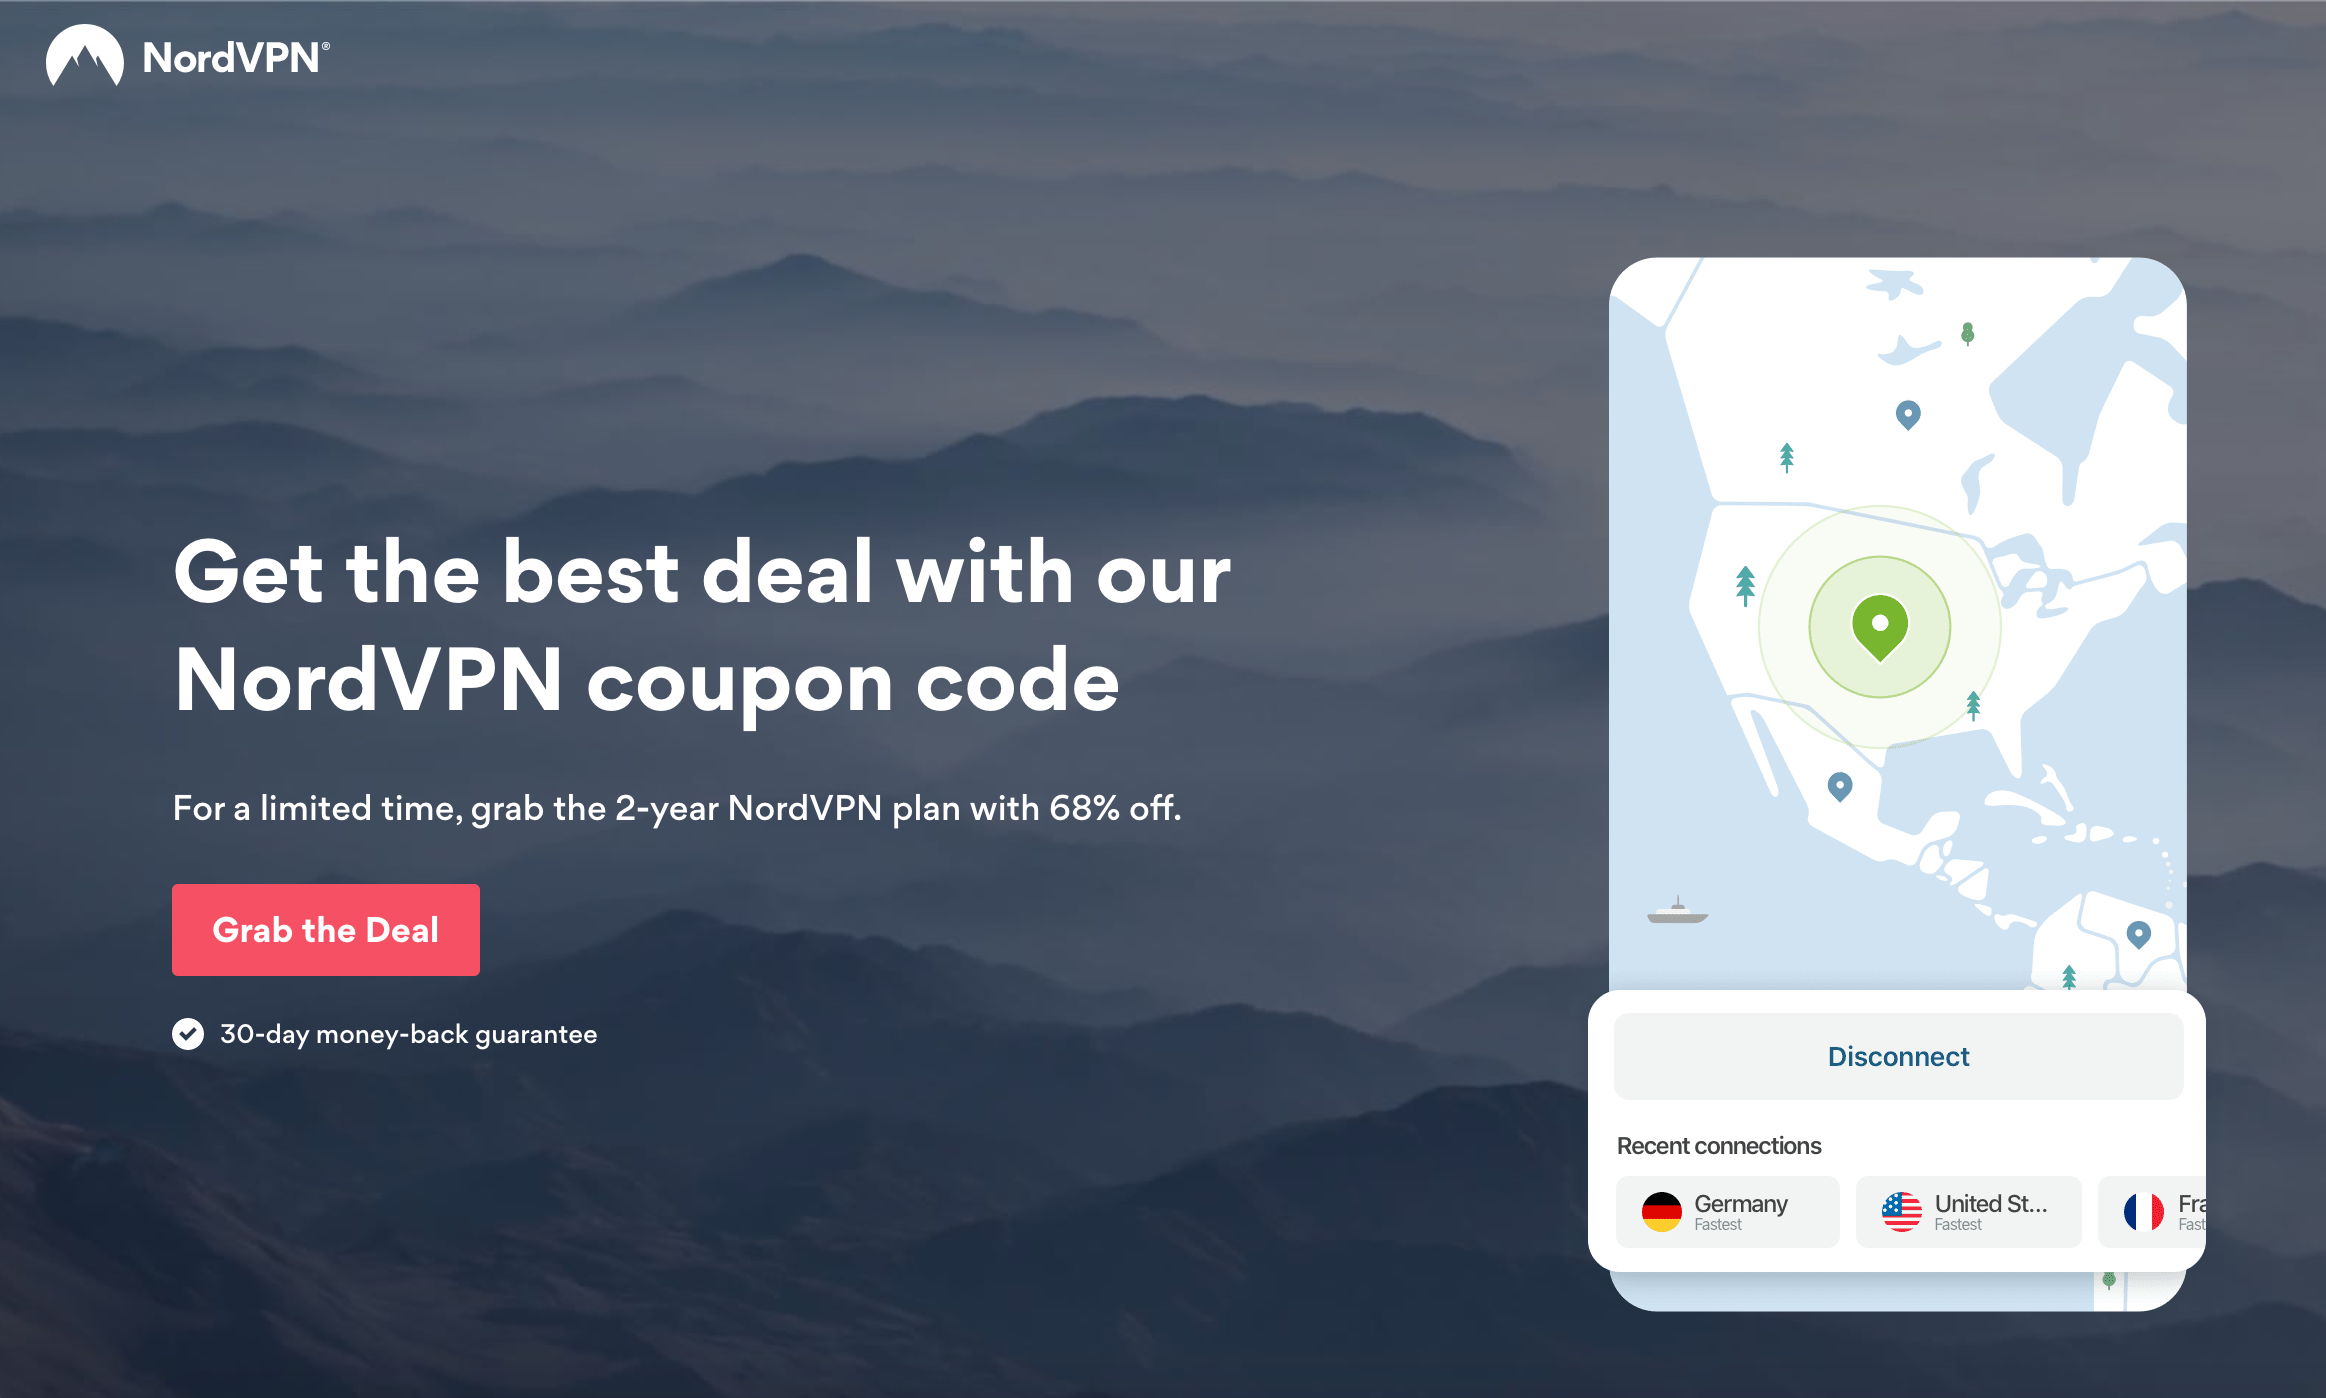 It is easy to secure your online privacy with NordVPN